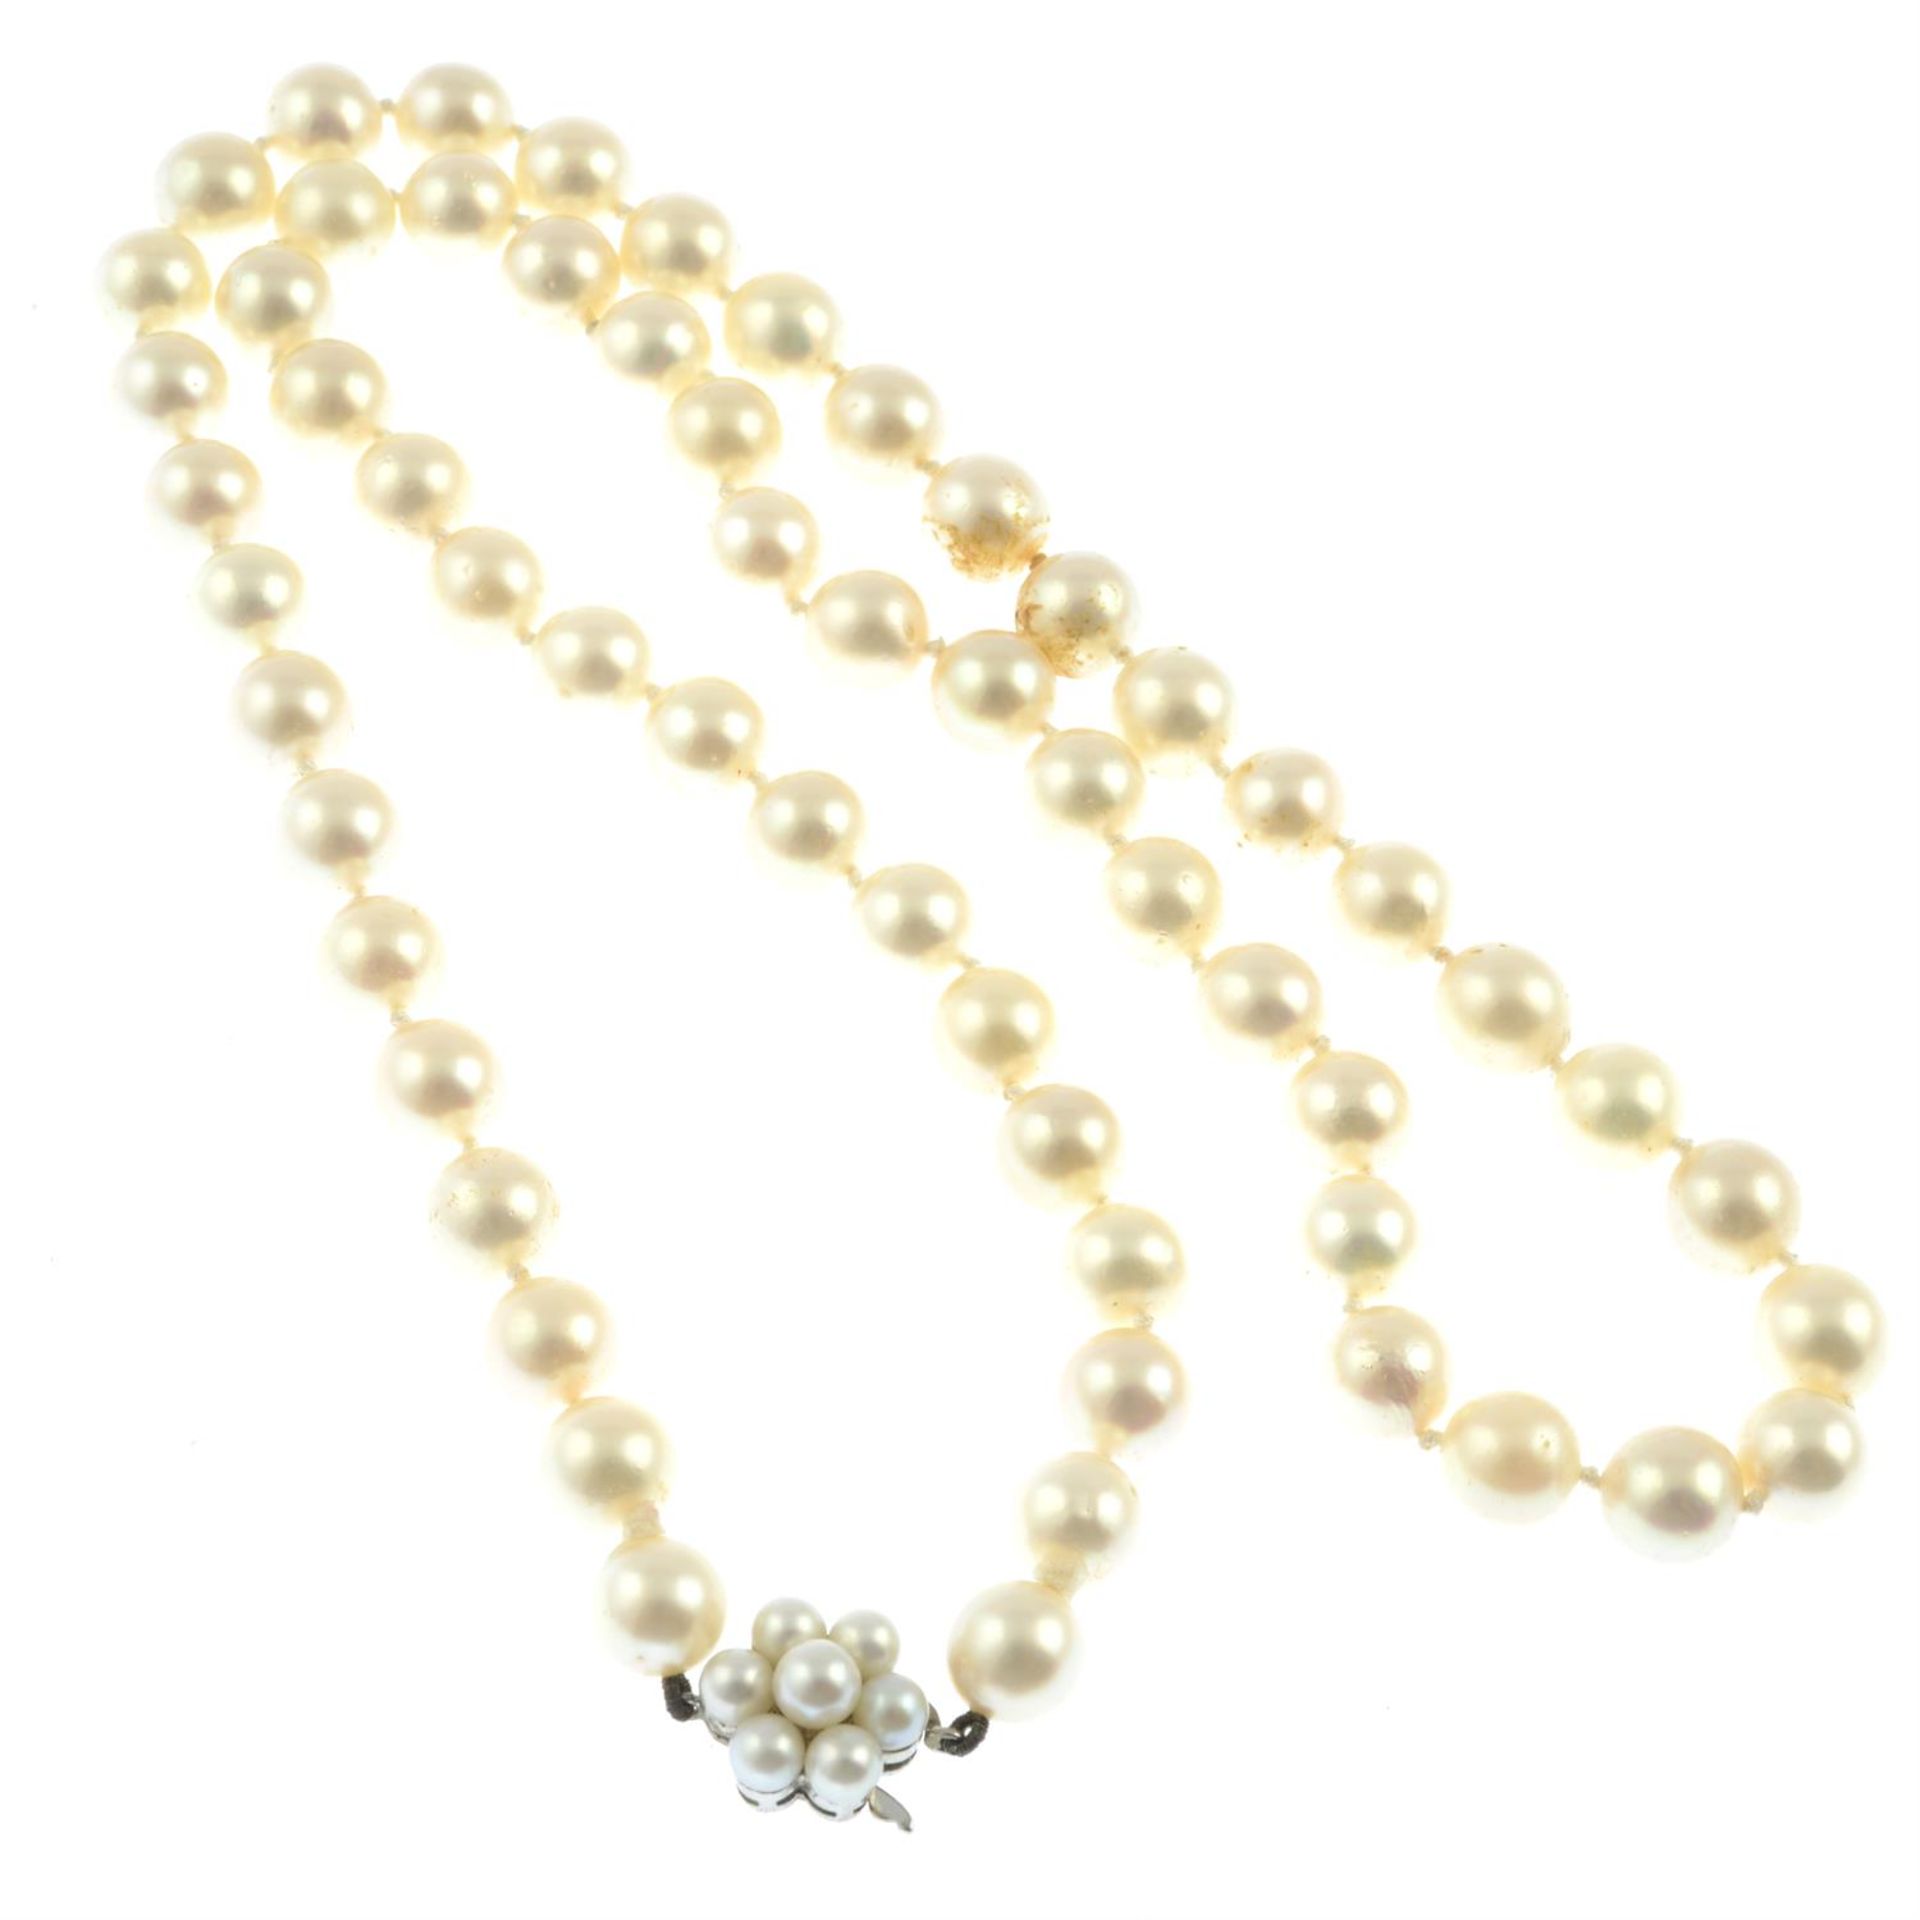 A 1960s cultured pearl necklace, with 9ct gold cultured pearl floral clasp.